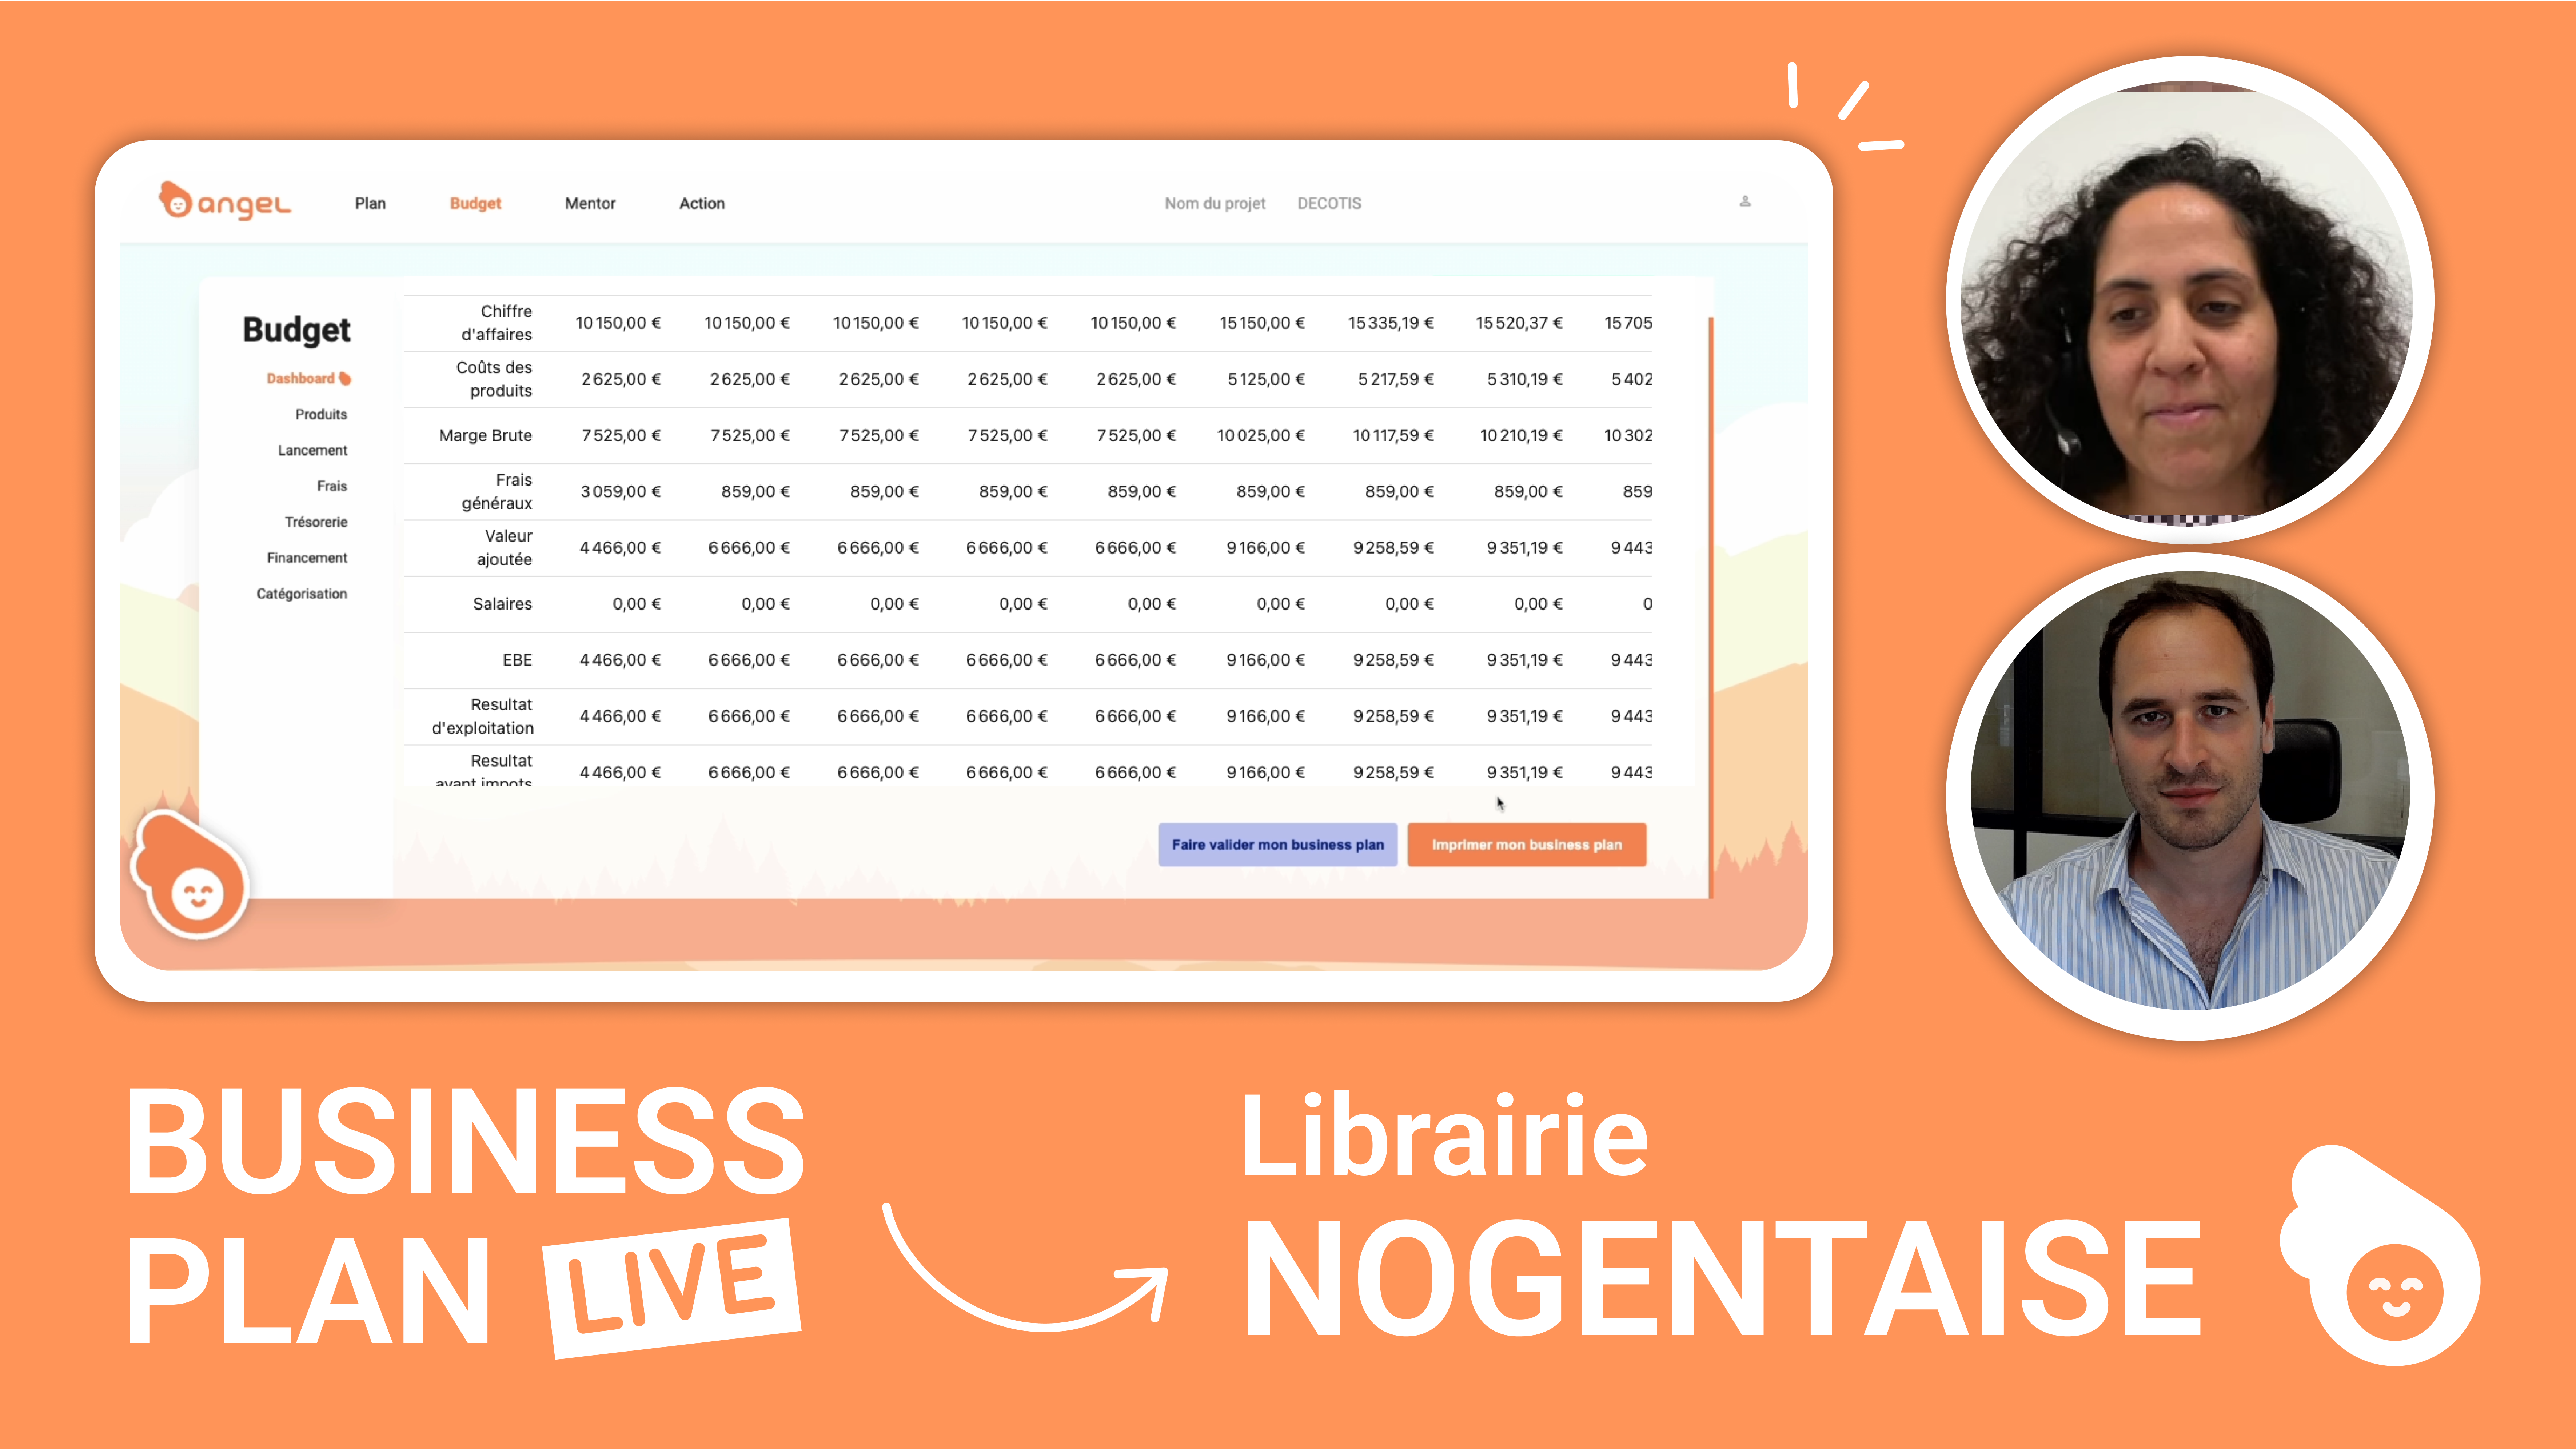 Thumbails Business plan Live librairie Nogentaise (1)